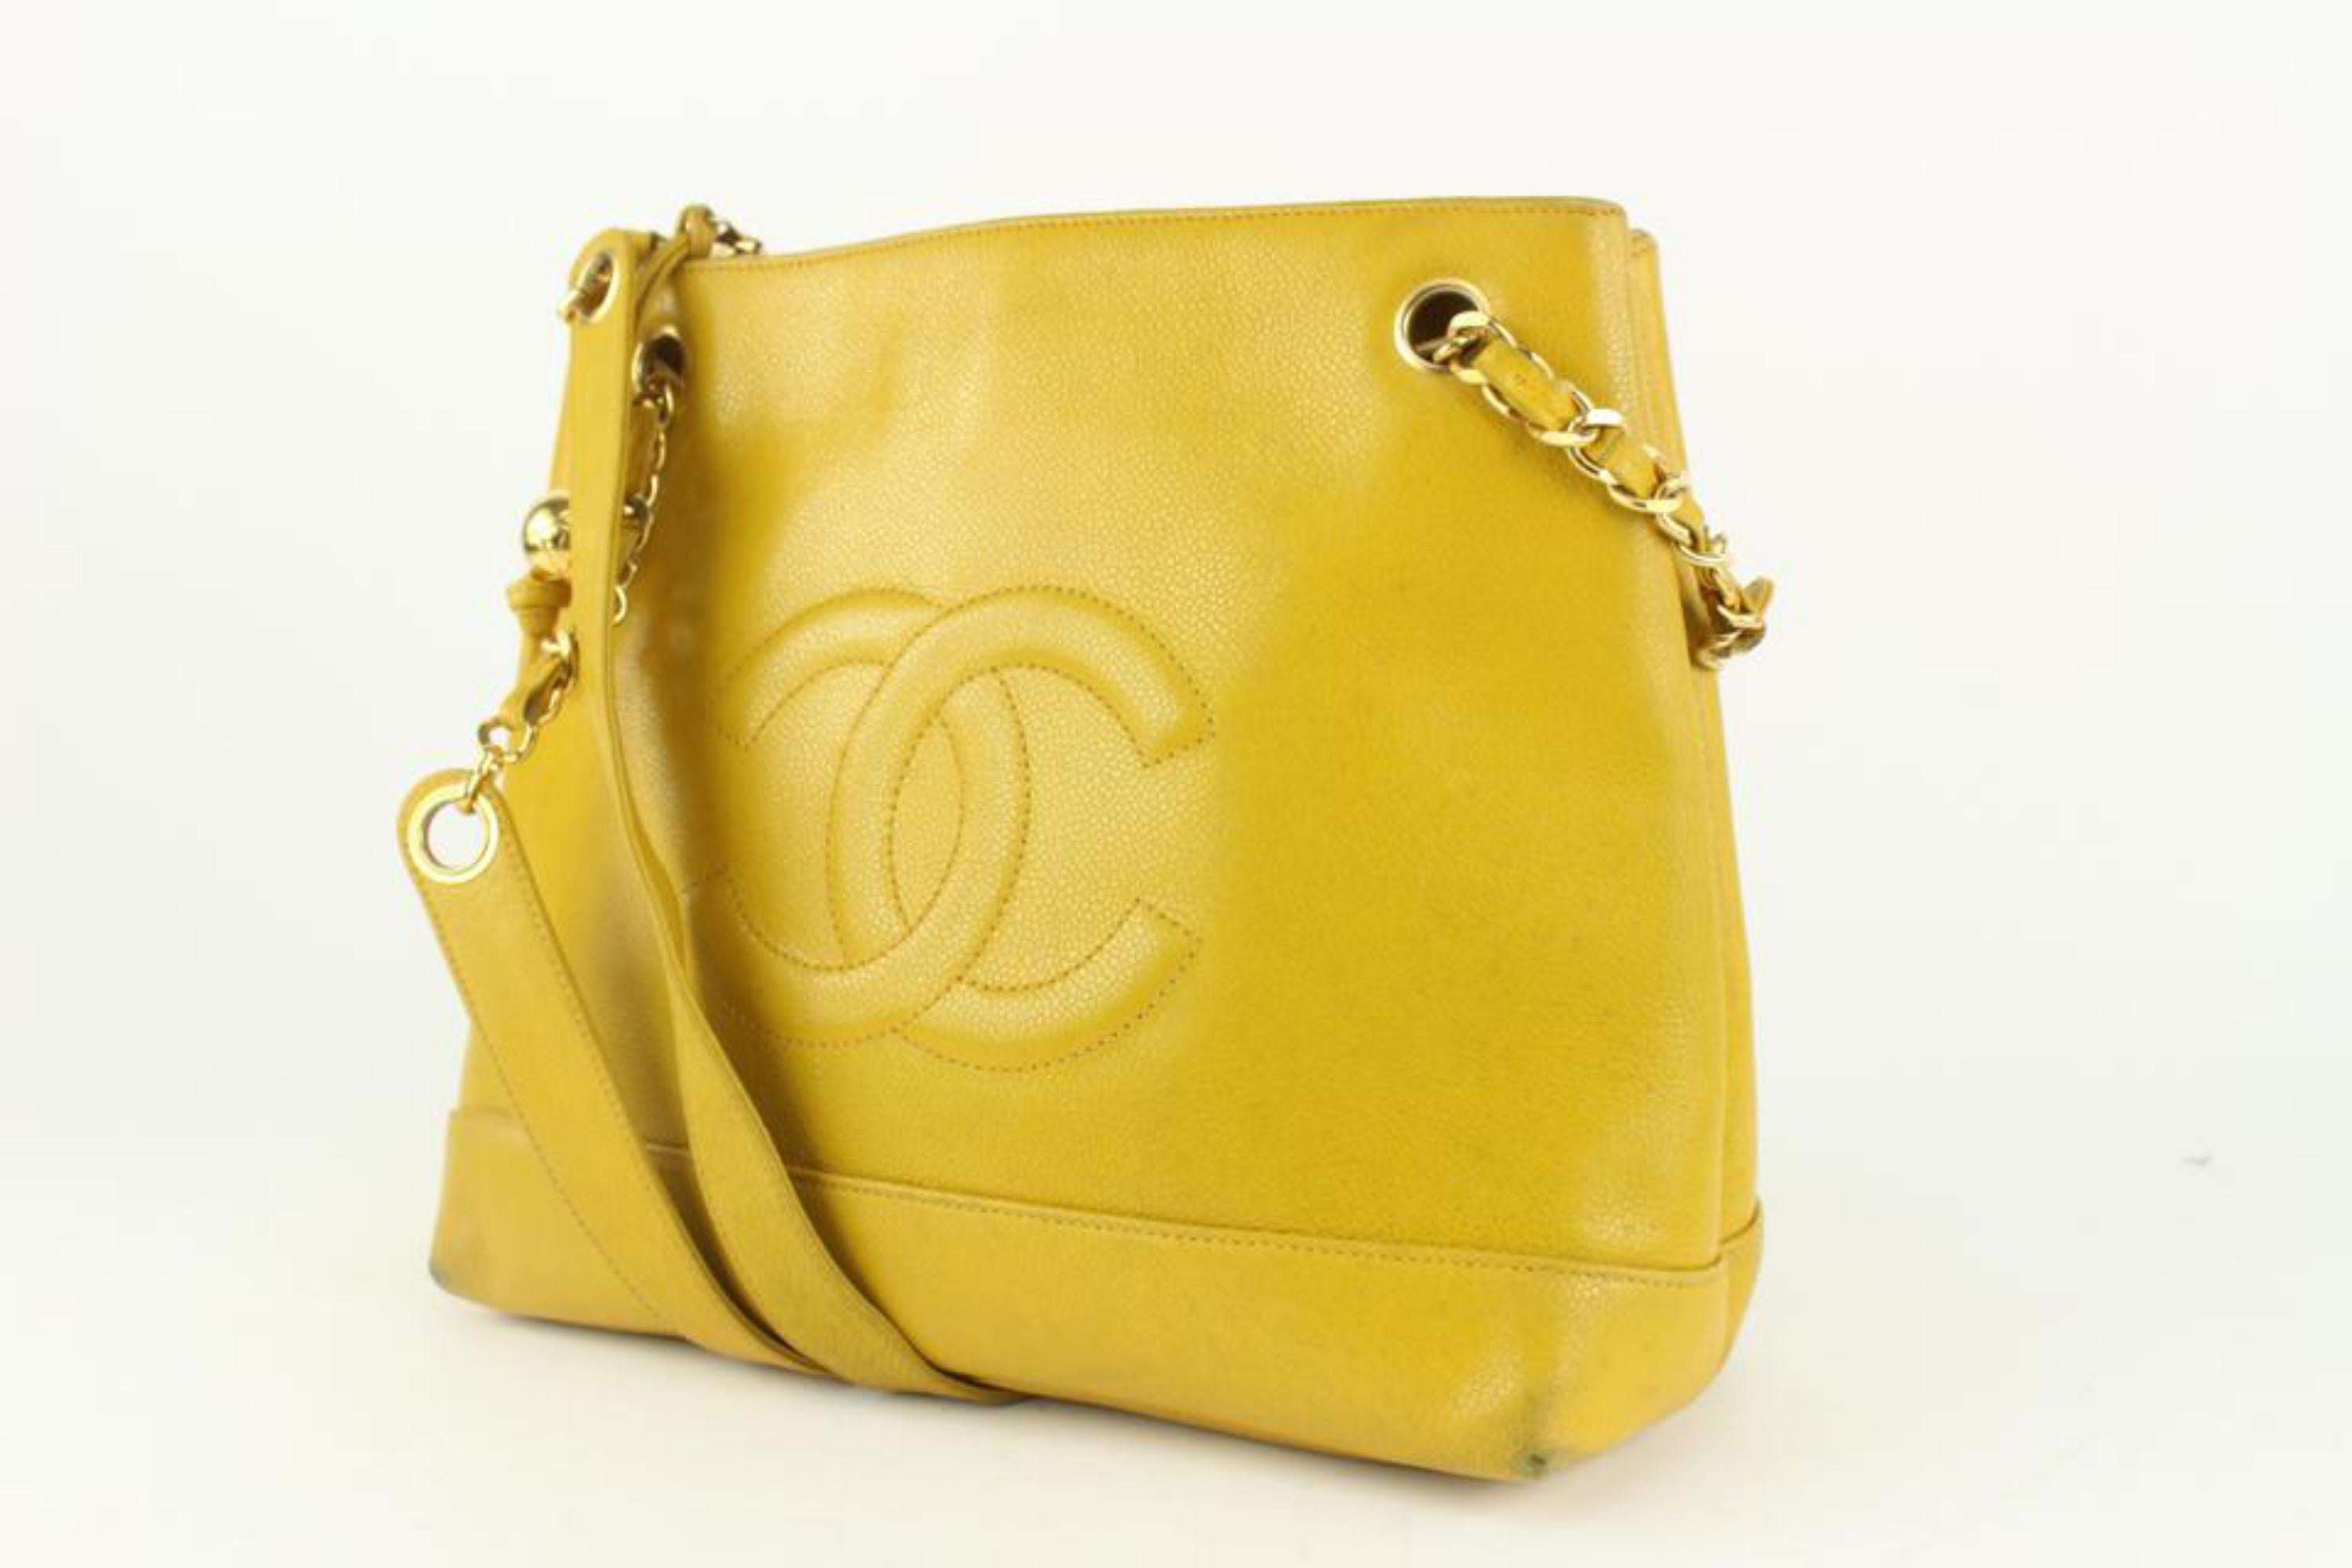 Chanel Mustard Yellow Caviar Leather Timeless CC Chain Tote Bag 1115c5
Date Code/Serial Number: 2366786
Made In: Italy
Measurements: Length:  13